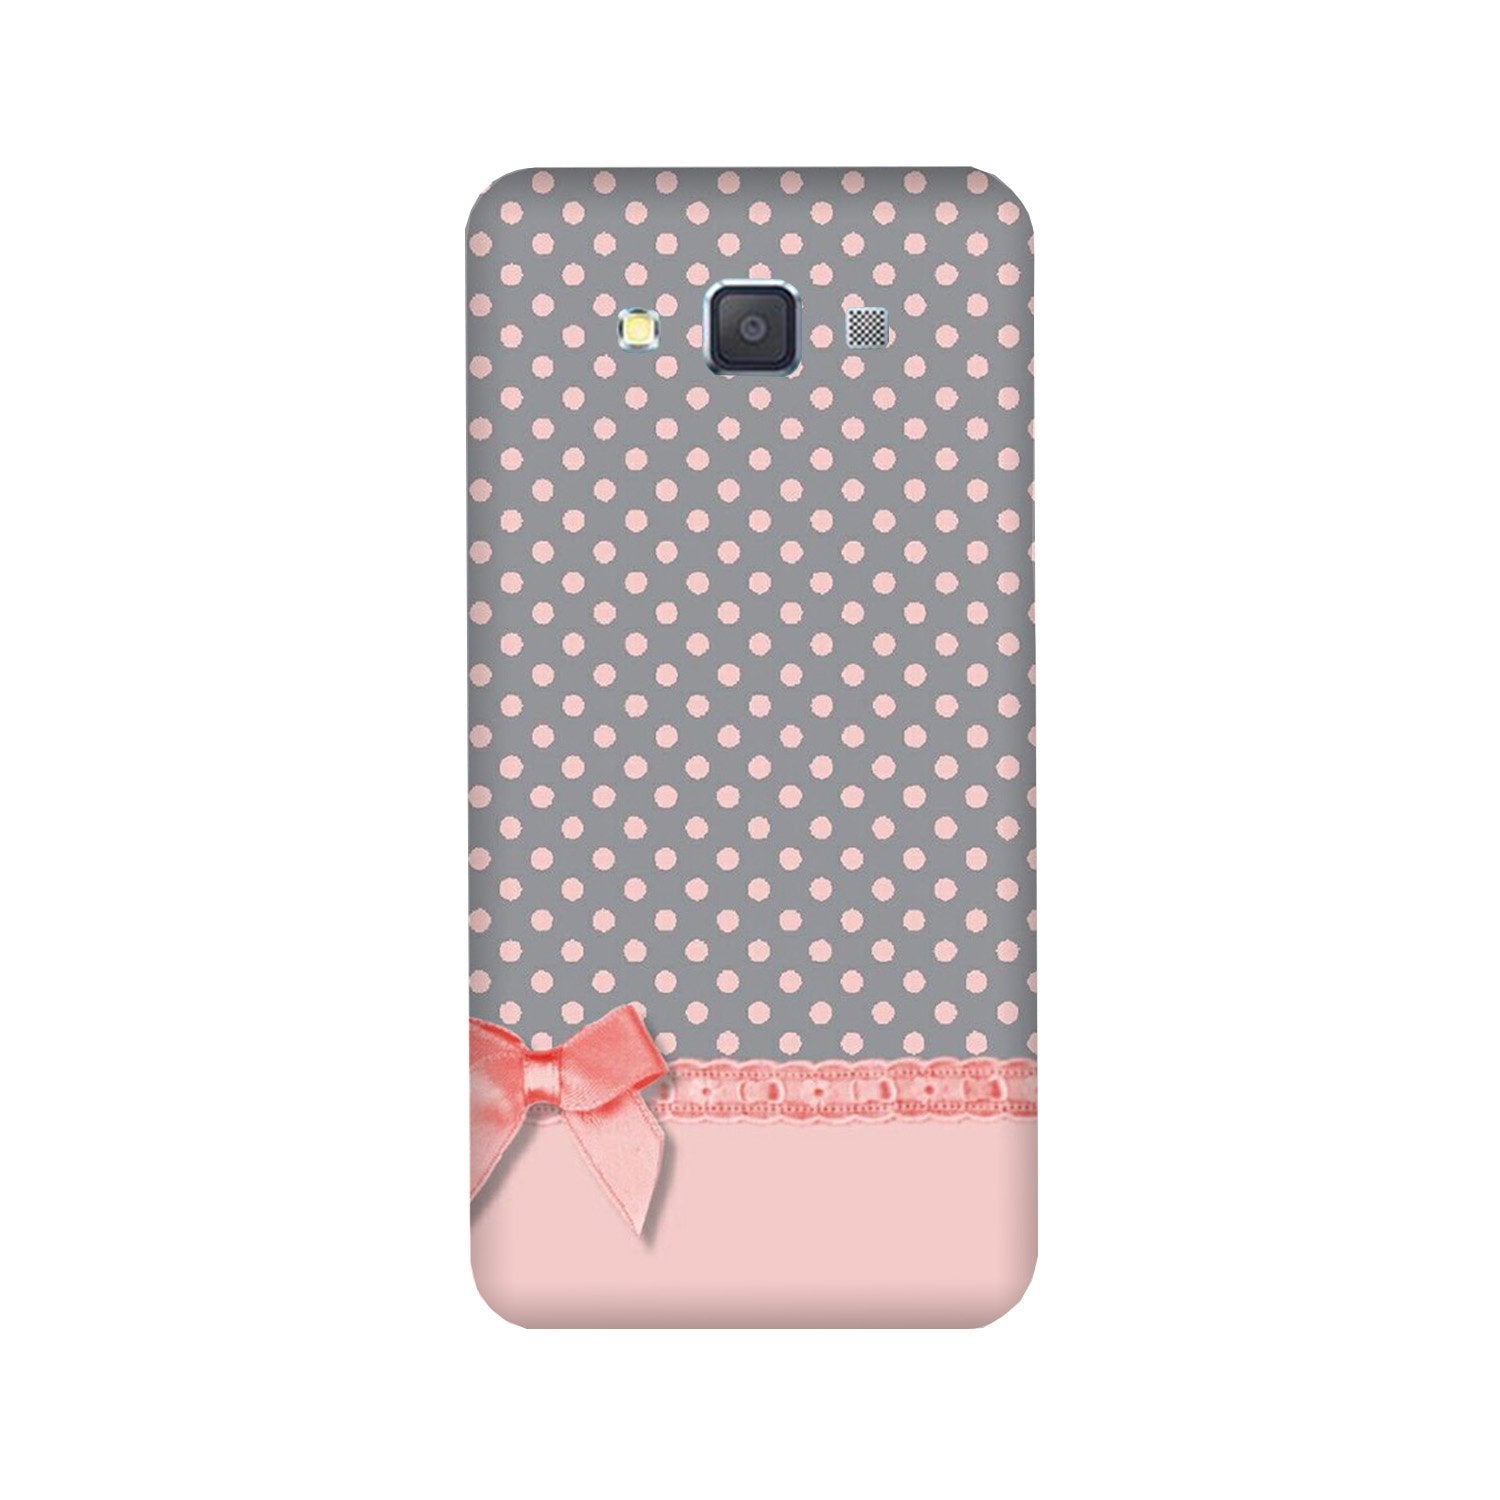 Gift Wrap2 Case for Galaxy J5 (2016)